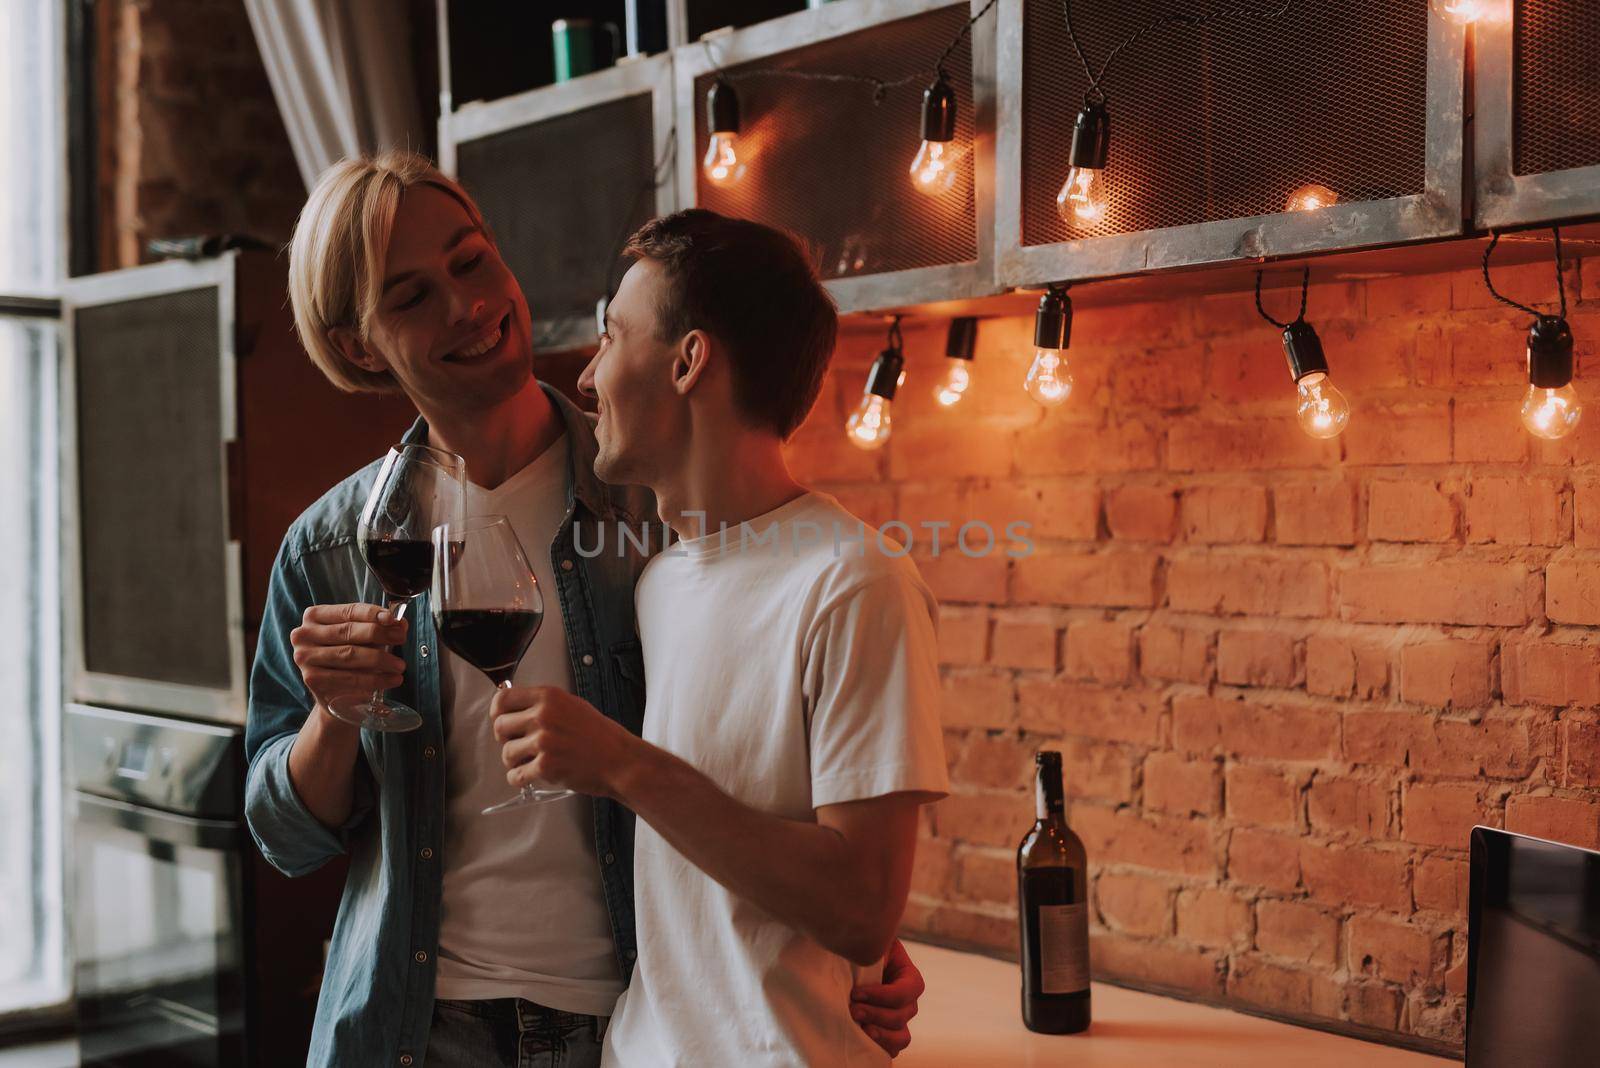 Loving gay couple at home. Two handsome men hugging and kissing on kitchen. Romantic atmosphere with bottle of red wine. LGBT concept.